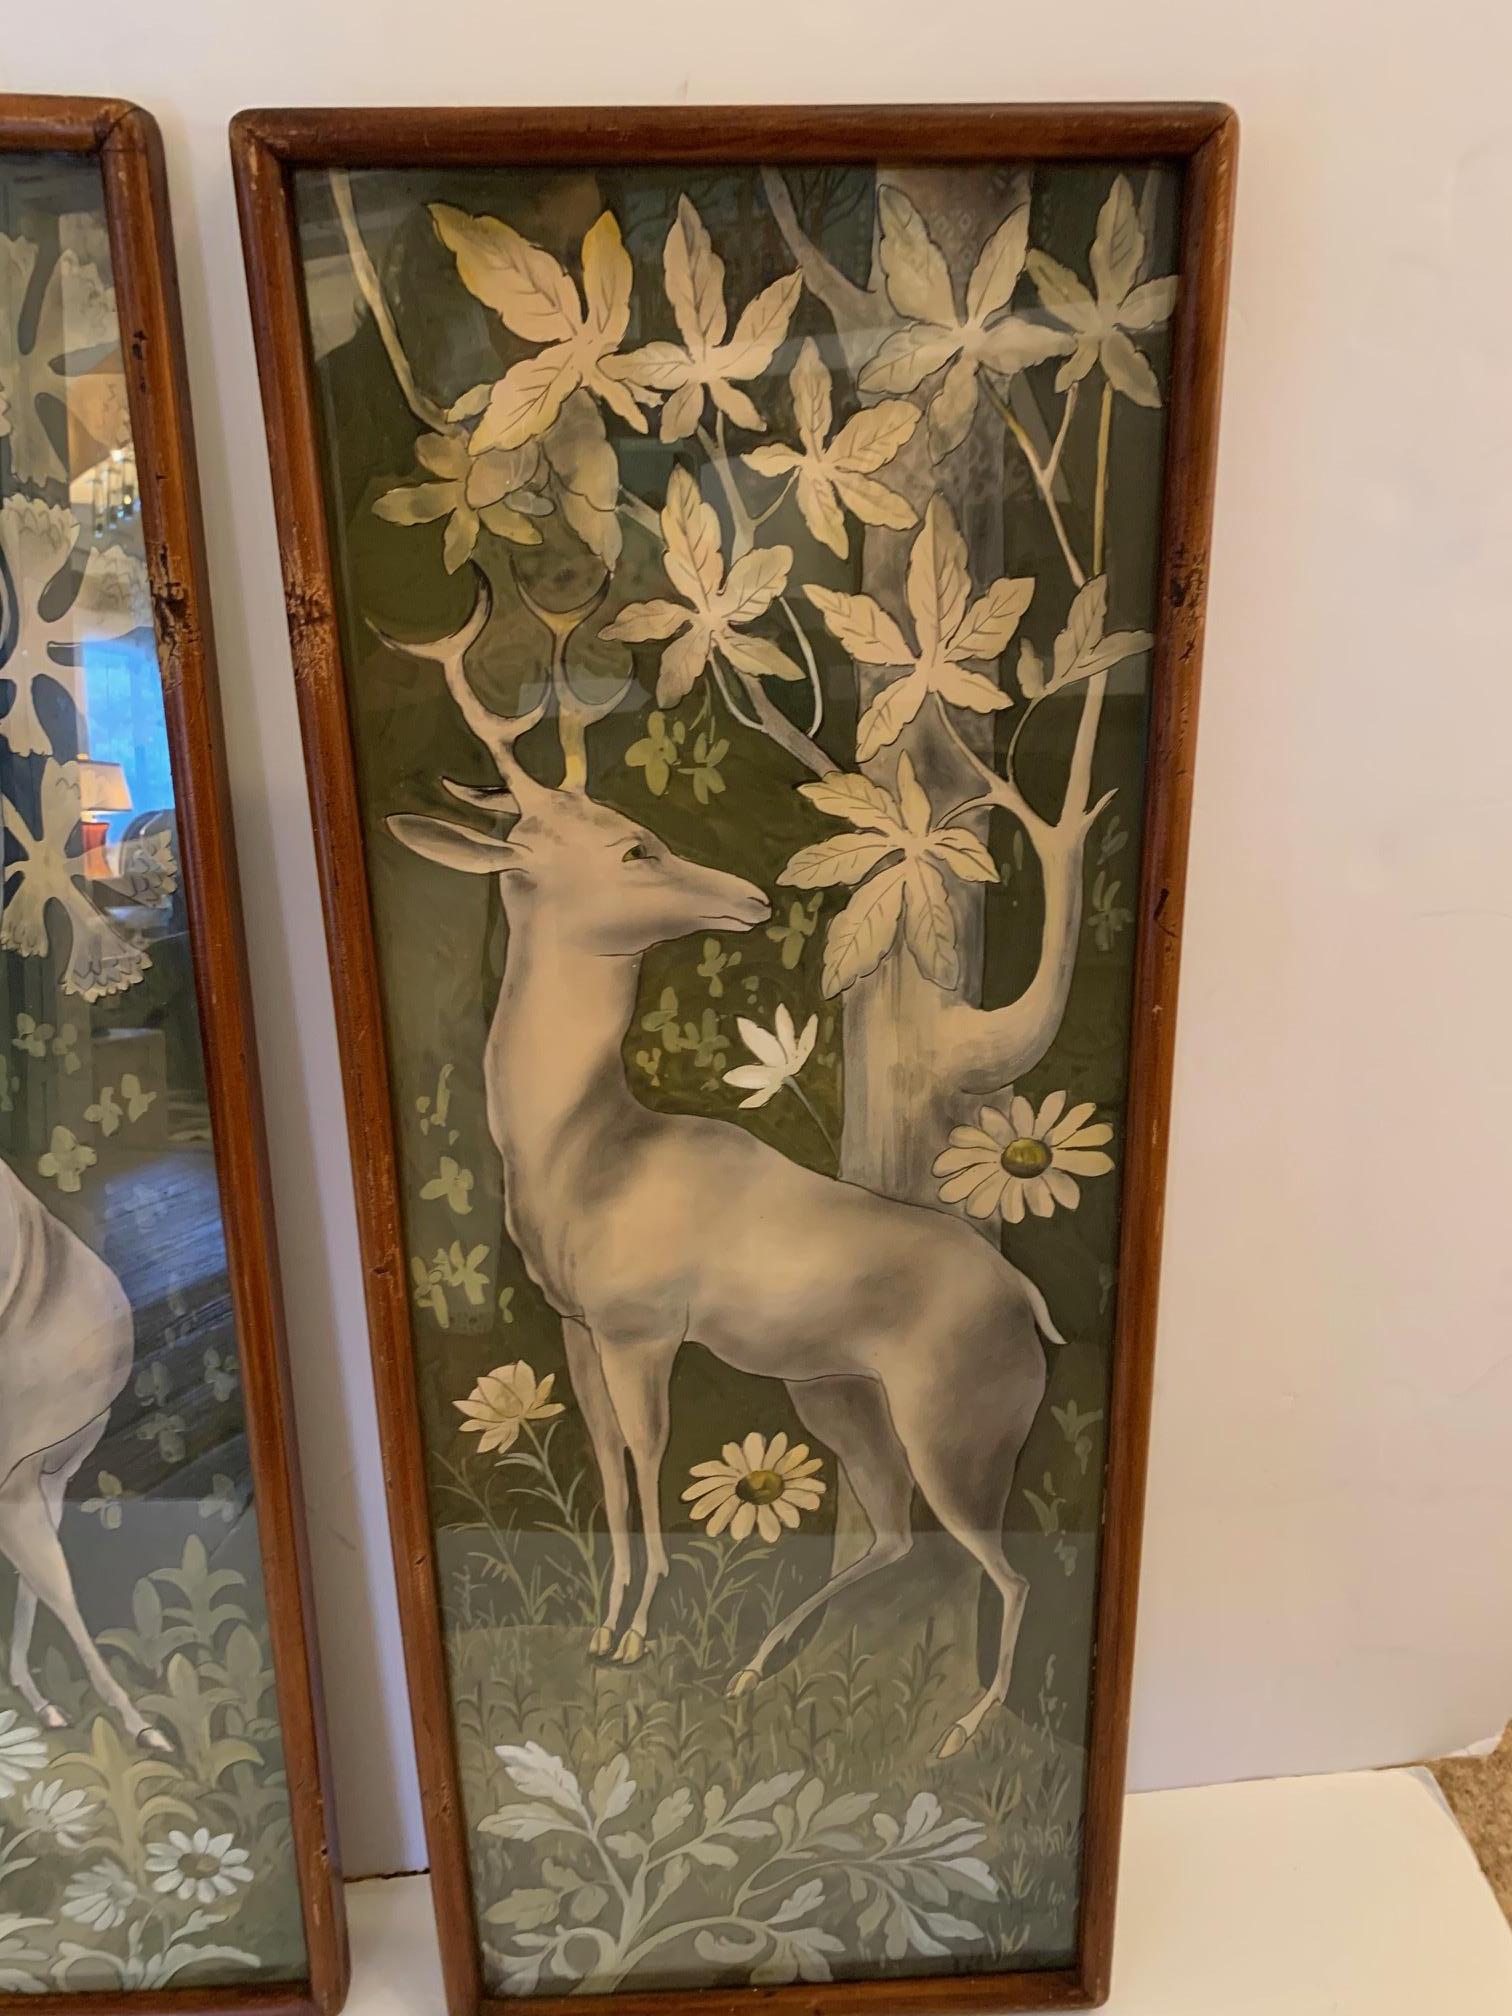 An ethereal show stopper triptych painting having 3 panels of gouache on paper in a muted color palette and other worldly scene of a deer grazing in a magical forest. 
Each panel is signed and measures 16” W x 1” D x 41.5” H.
 